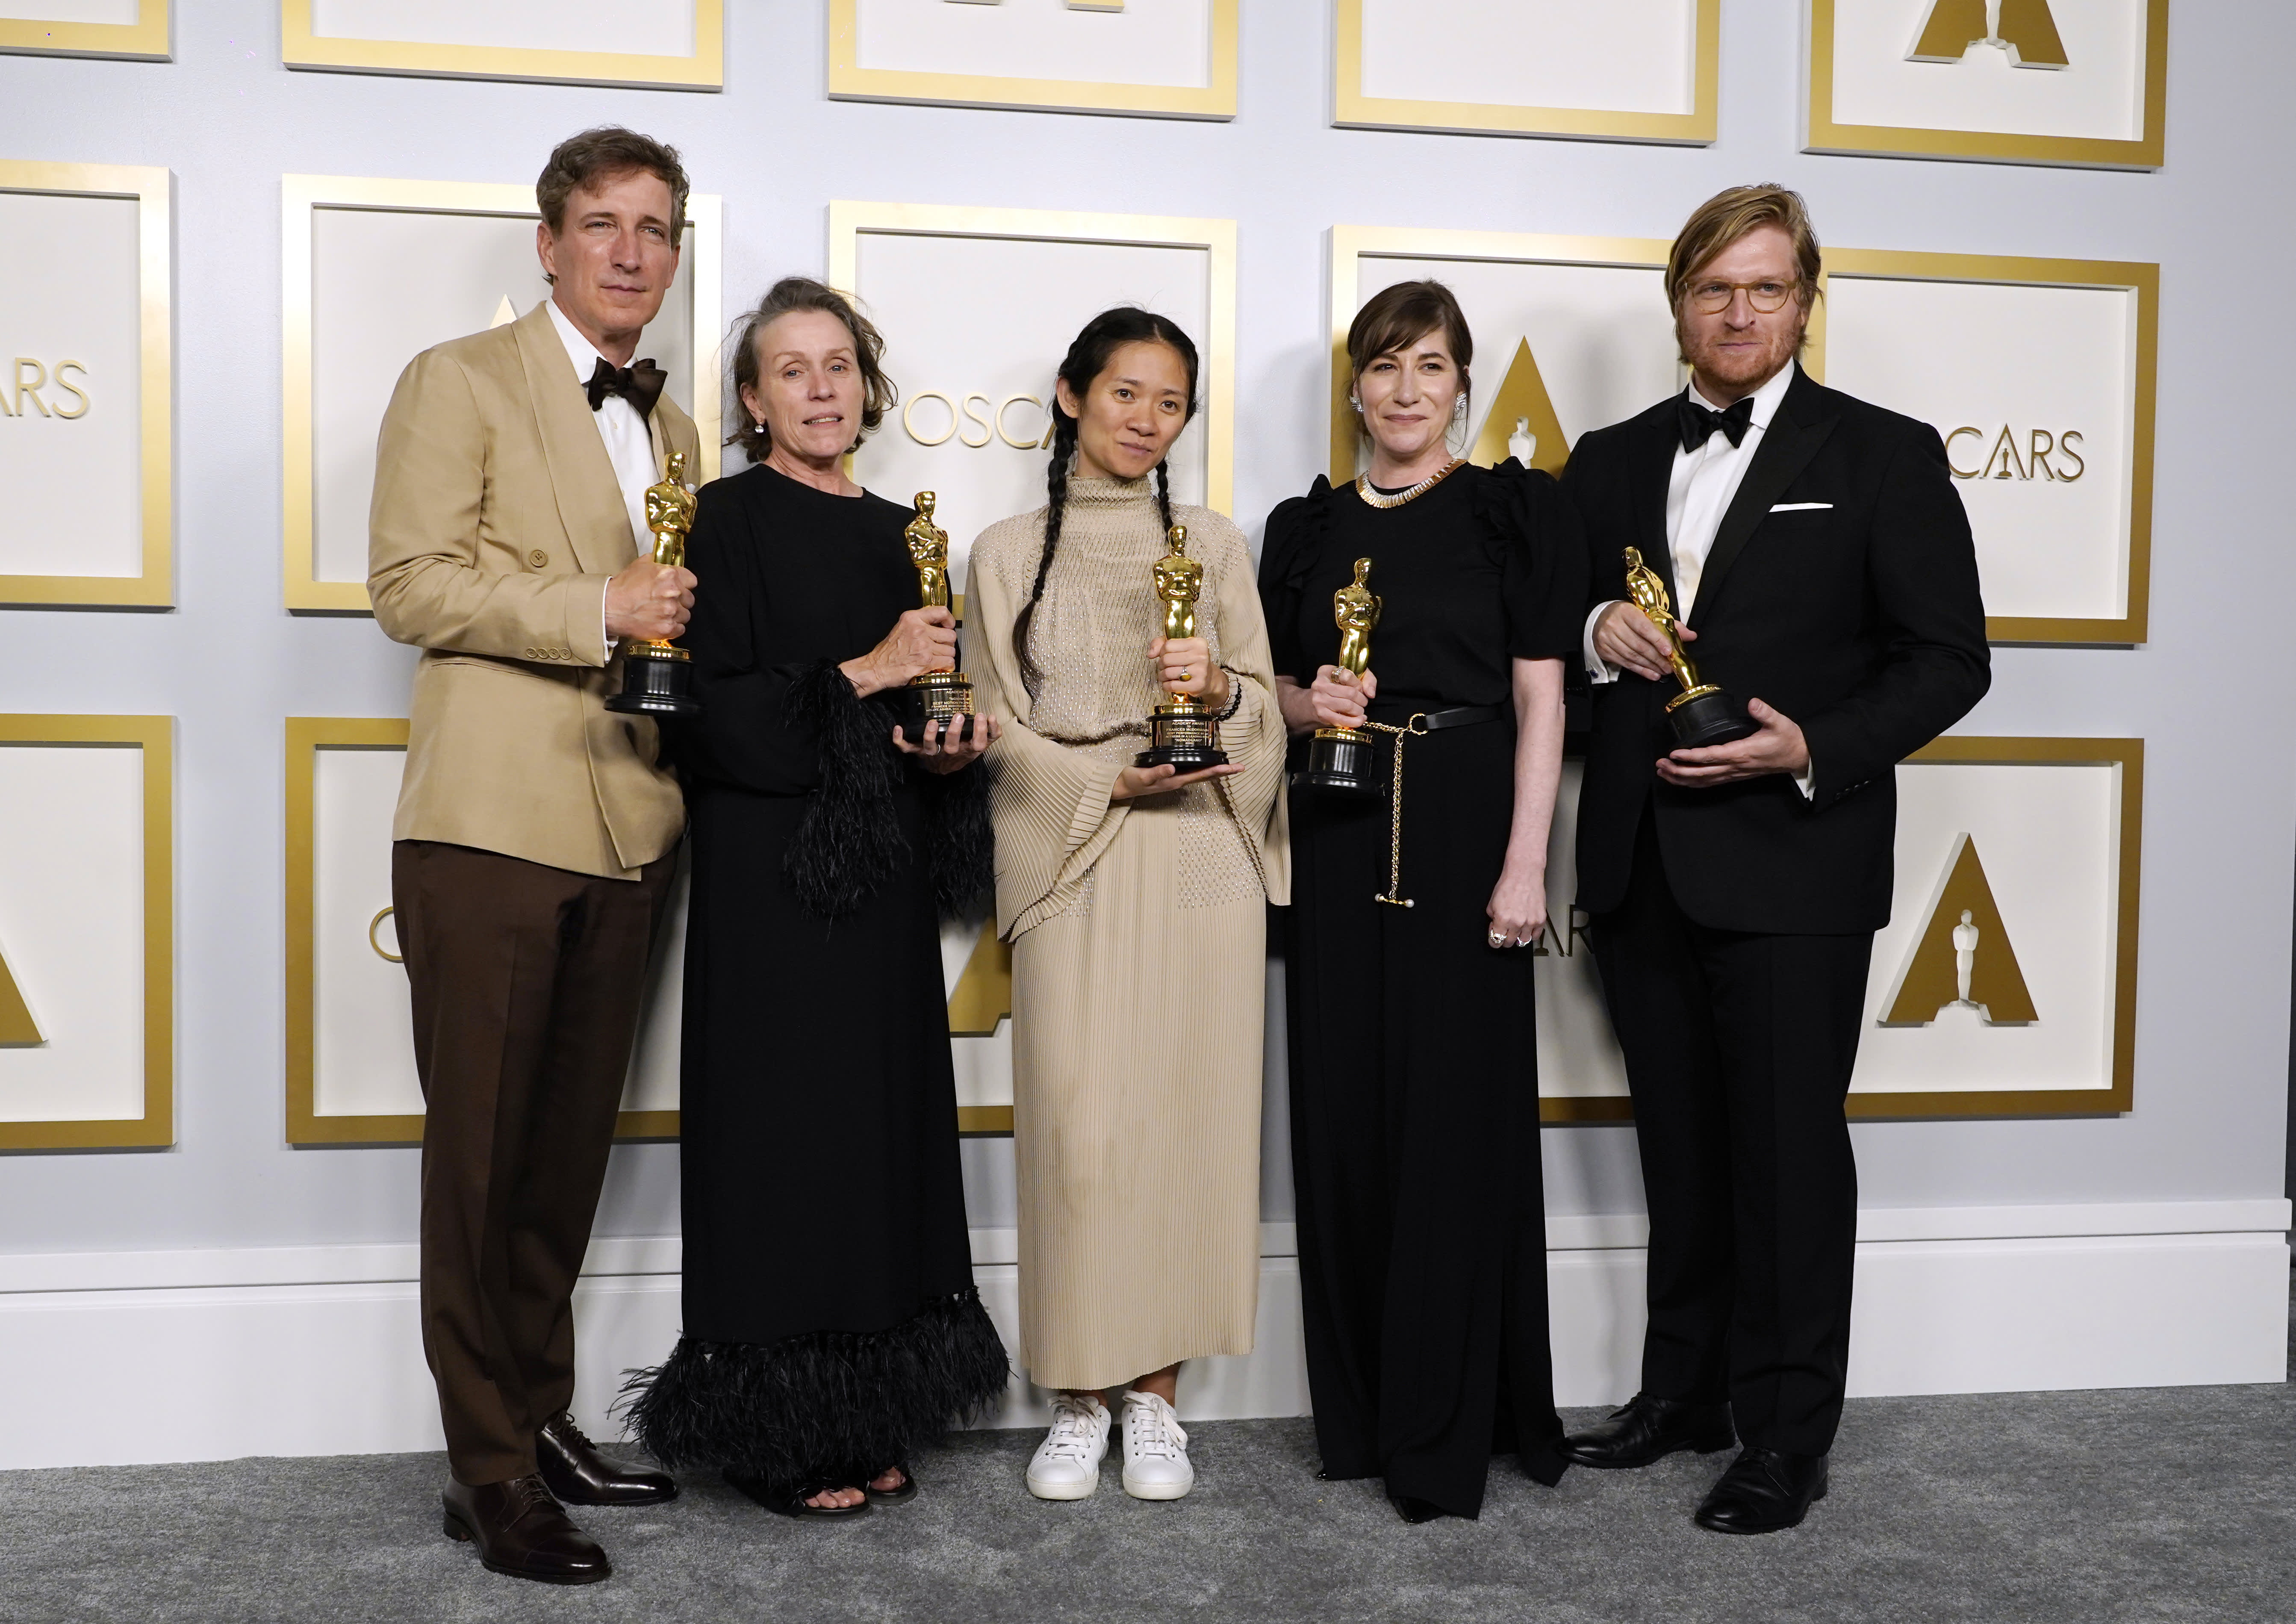 Oscars 2021: Full List of Nominees and Winners